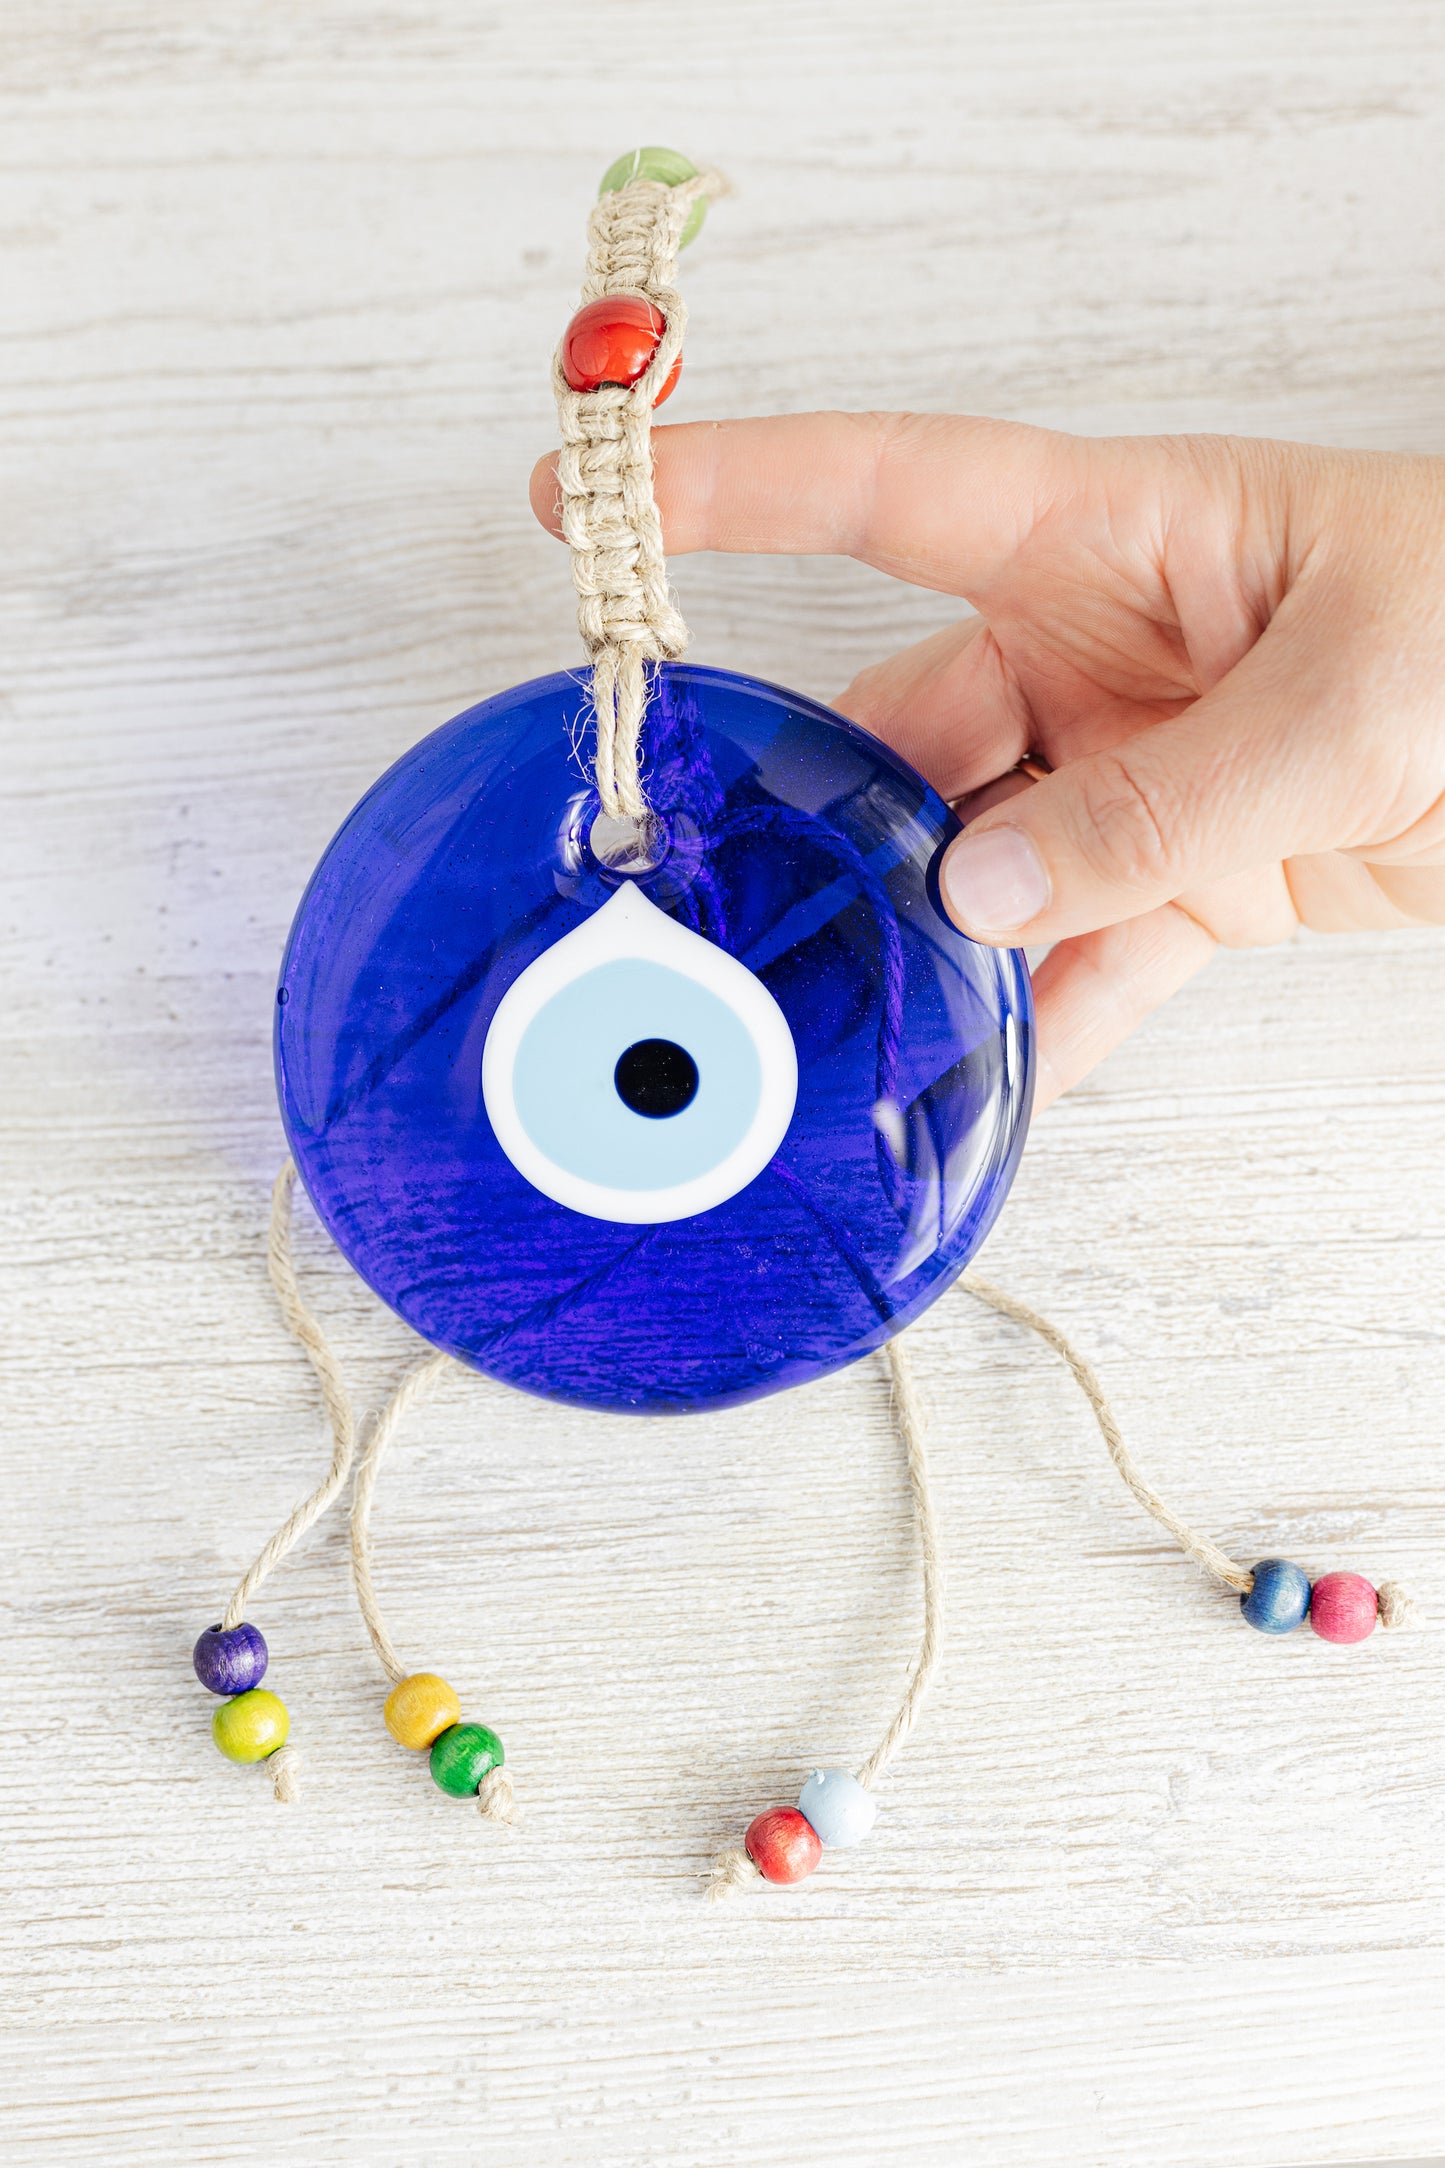 Flax Yarn Knitted 4.5" inches Evil Eye Glass Wall Hanging Decoration